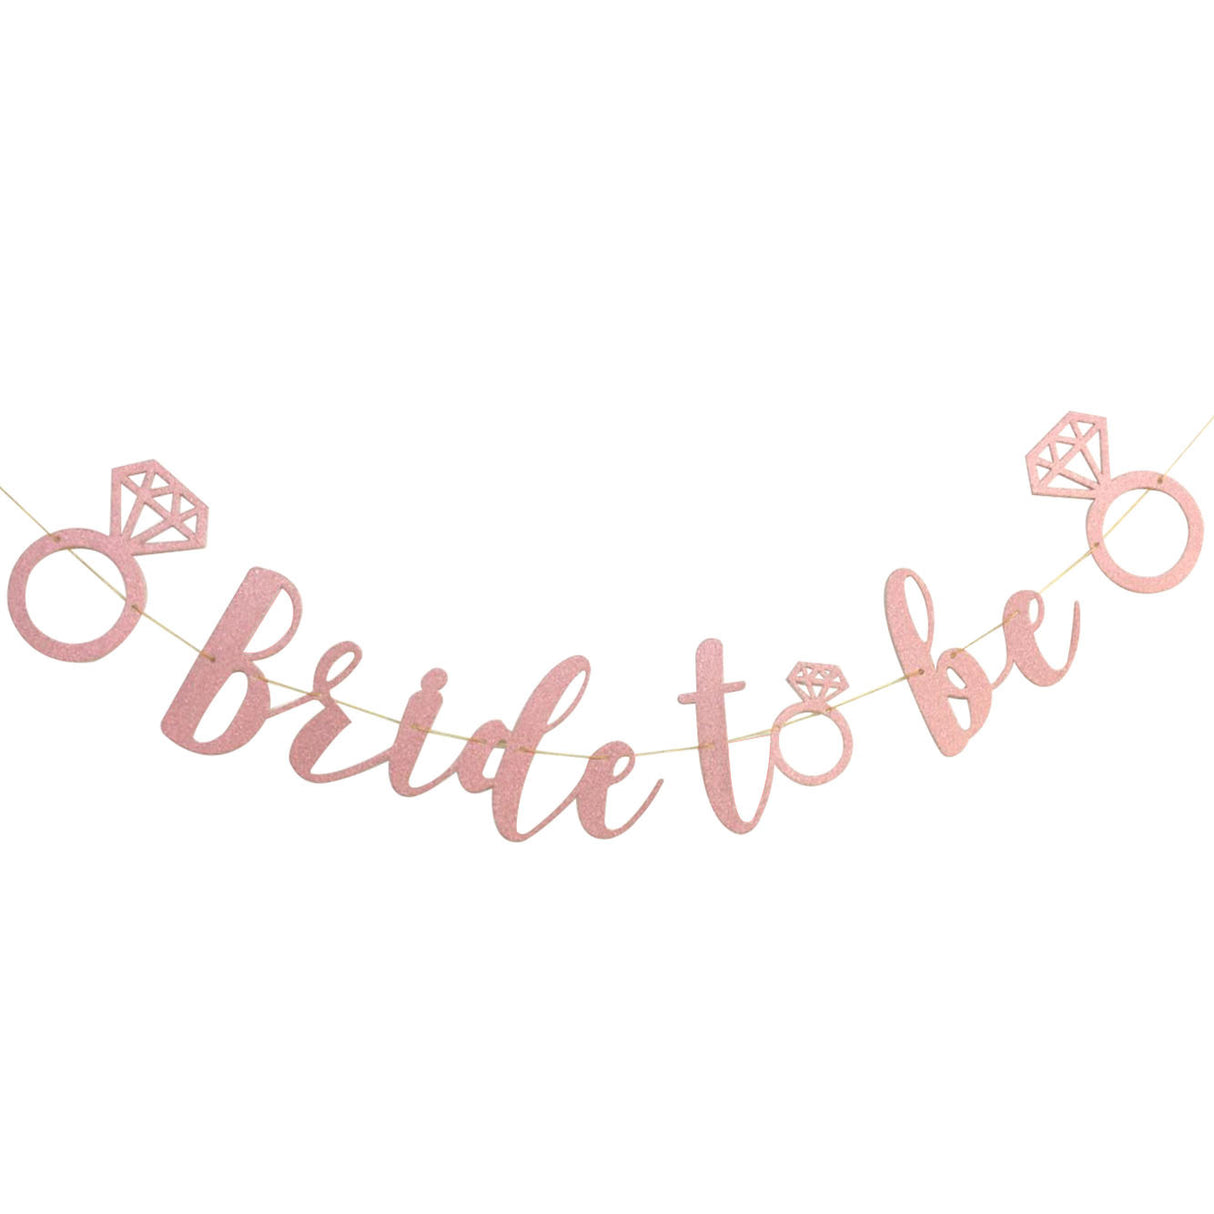 Bride To Be Banner - Glitter Rose Gold